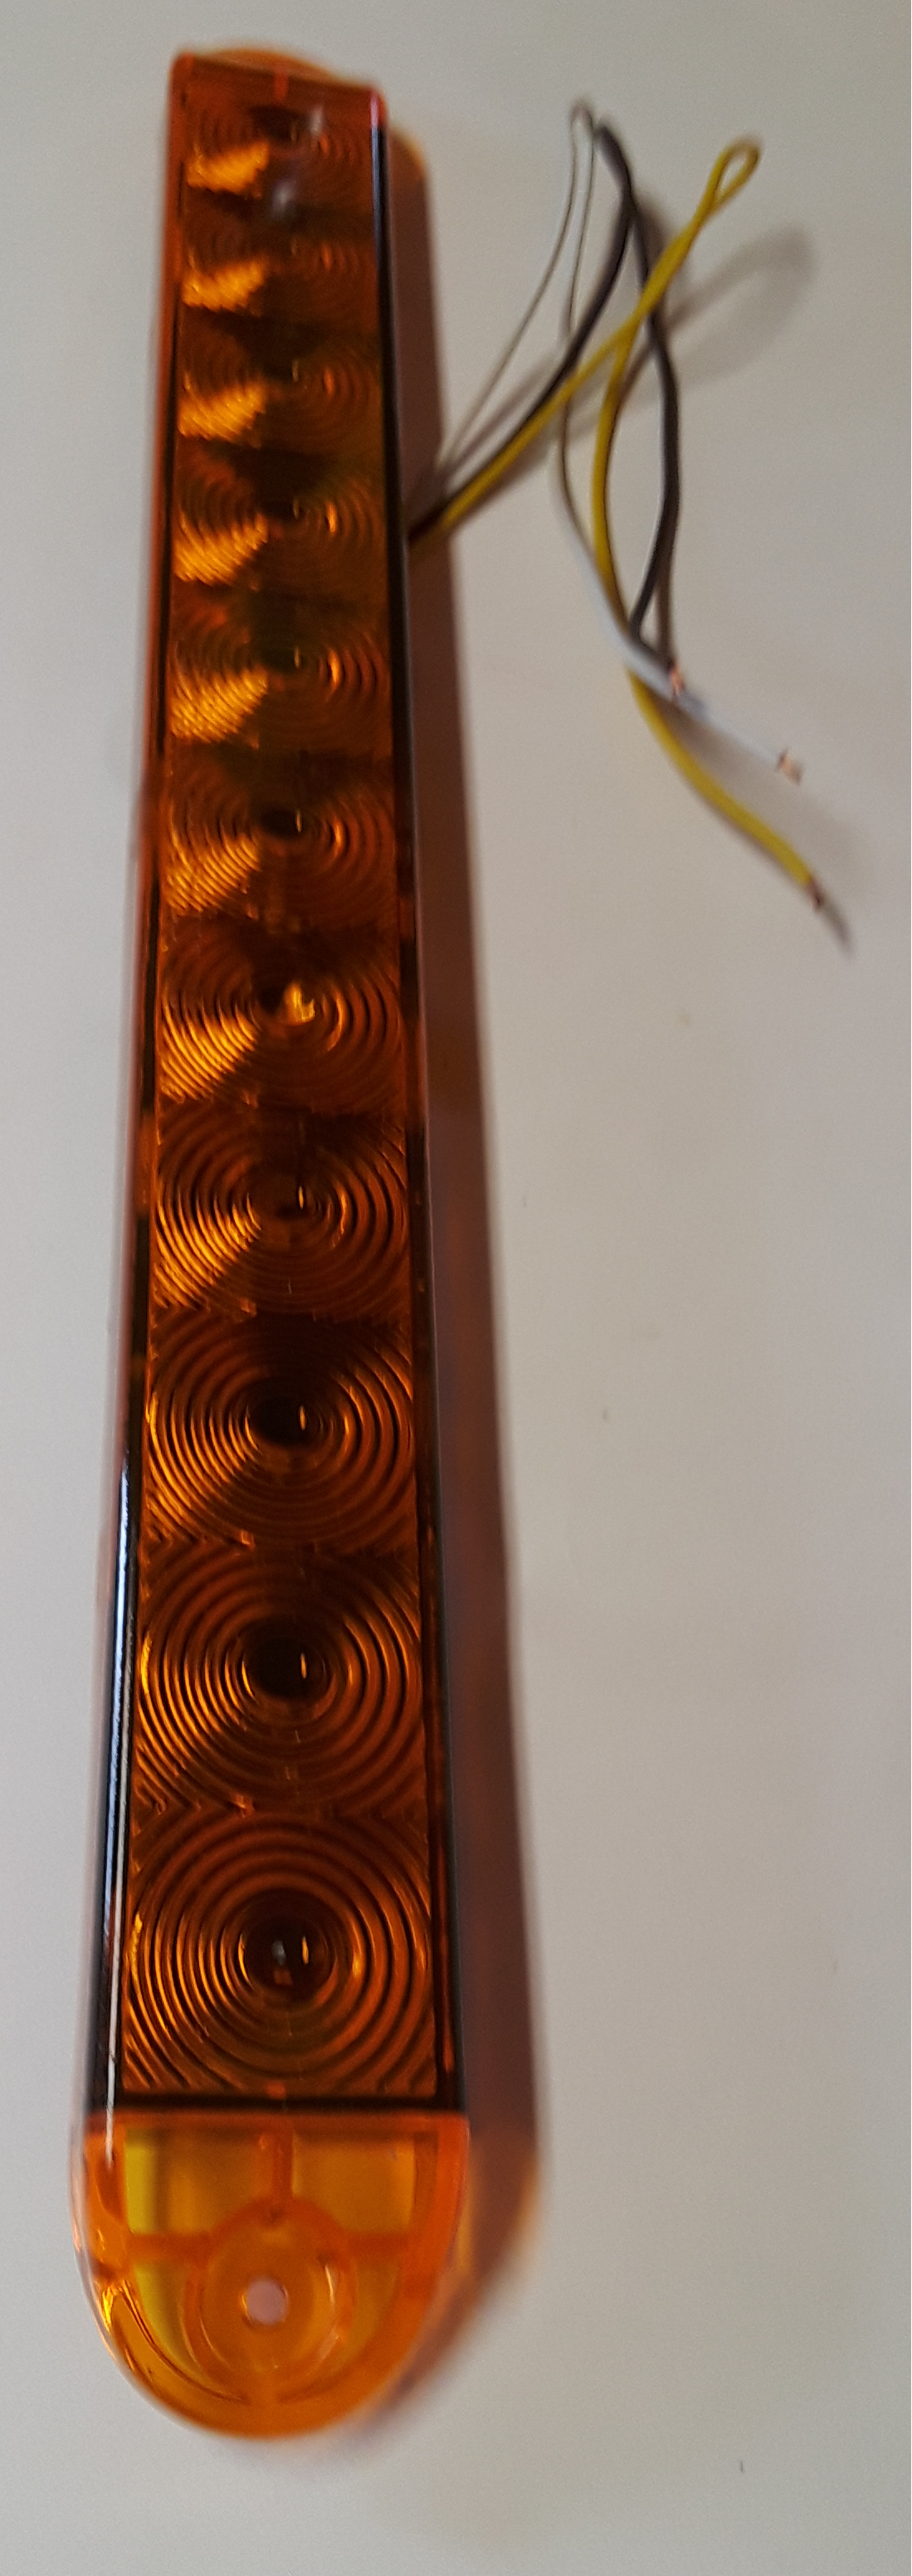 Surface Mount 11 LED Amber or Red Stop-Turn-Tail Light, 15.5"x2"